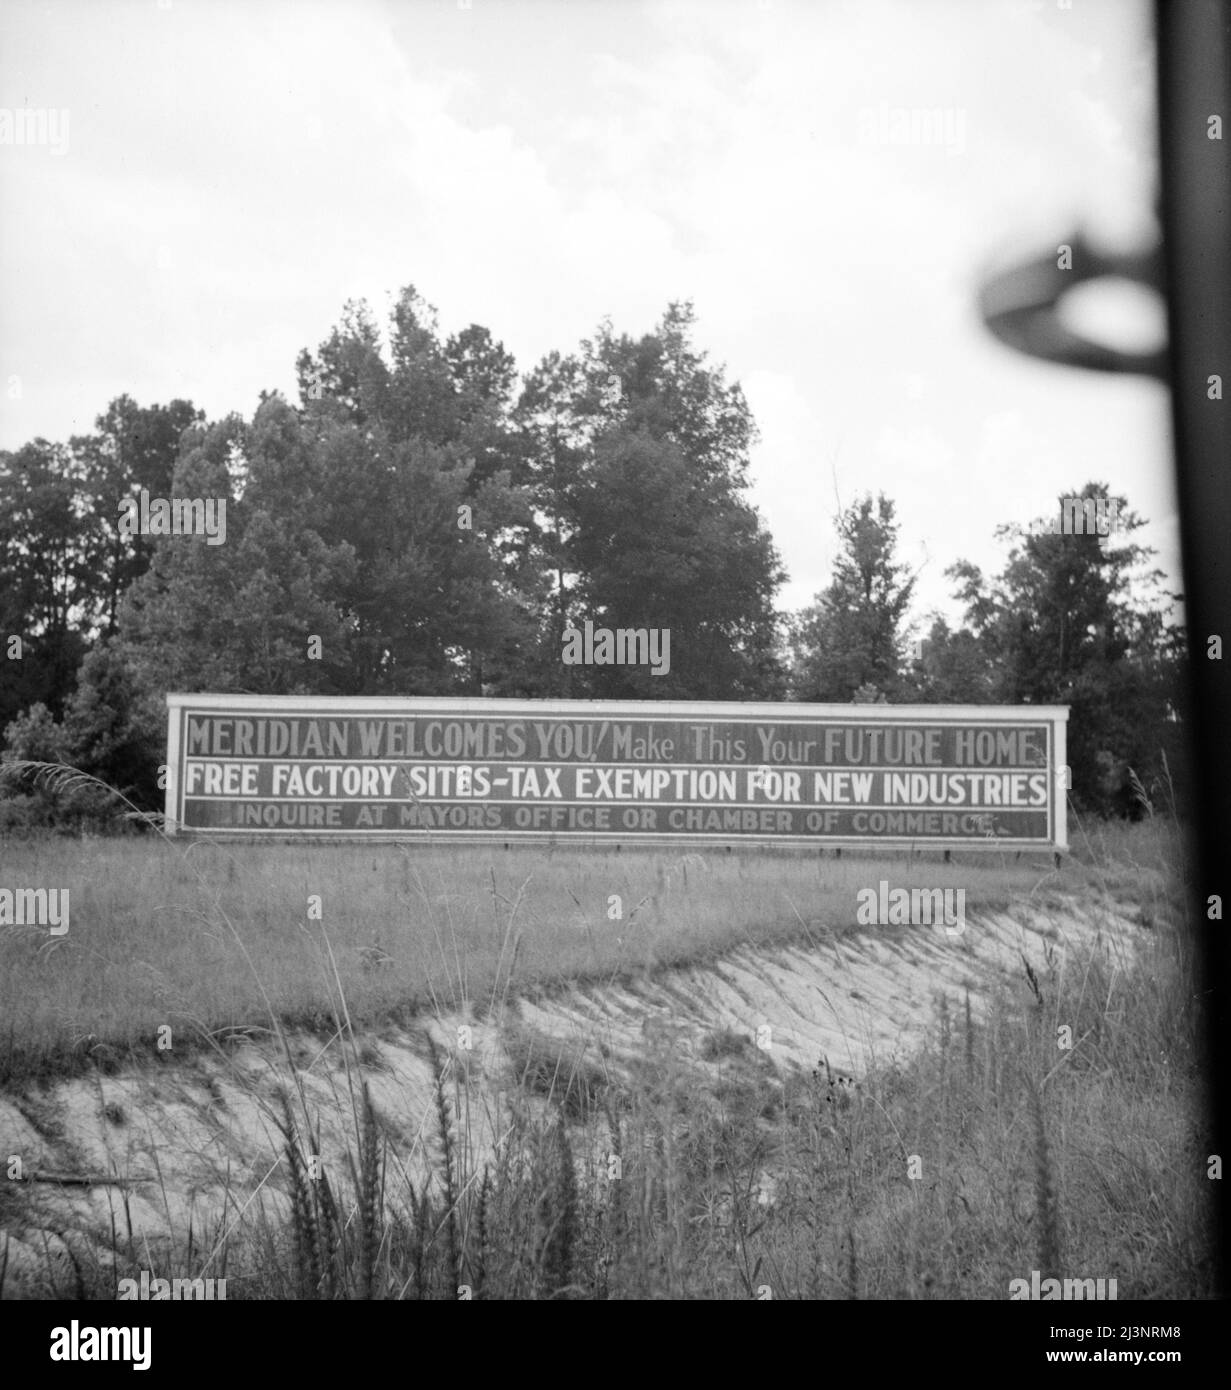 Note on industrialization of the South. Meridian, Mississippi. [Meridian Welcomes You! Make This Your Future Home; Free Factory Sites - Tax Exemption for New Industries; Inquire at Mayor's Office or Chamber of Commerce]. Stock Photo